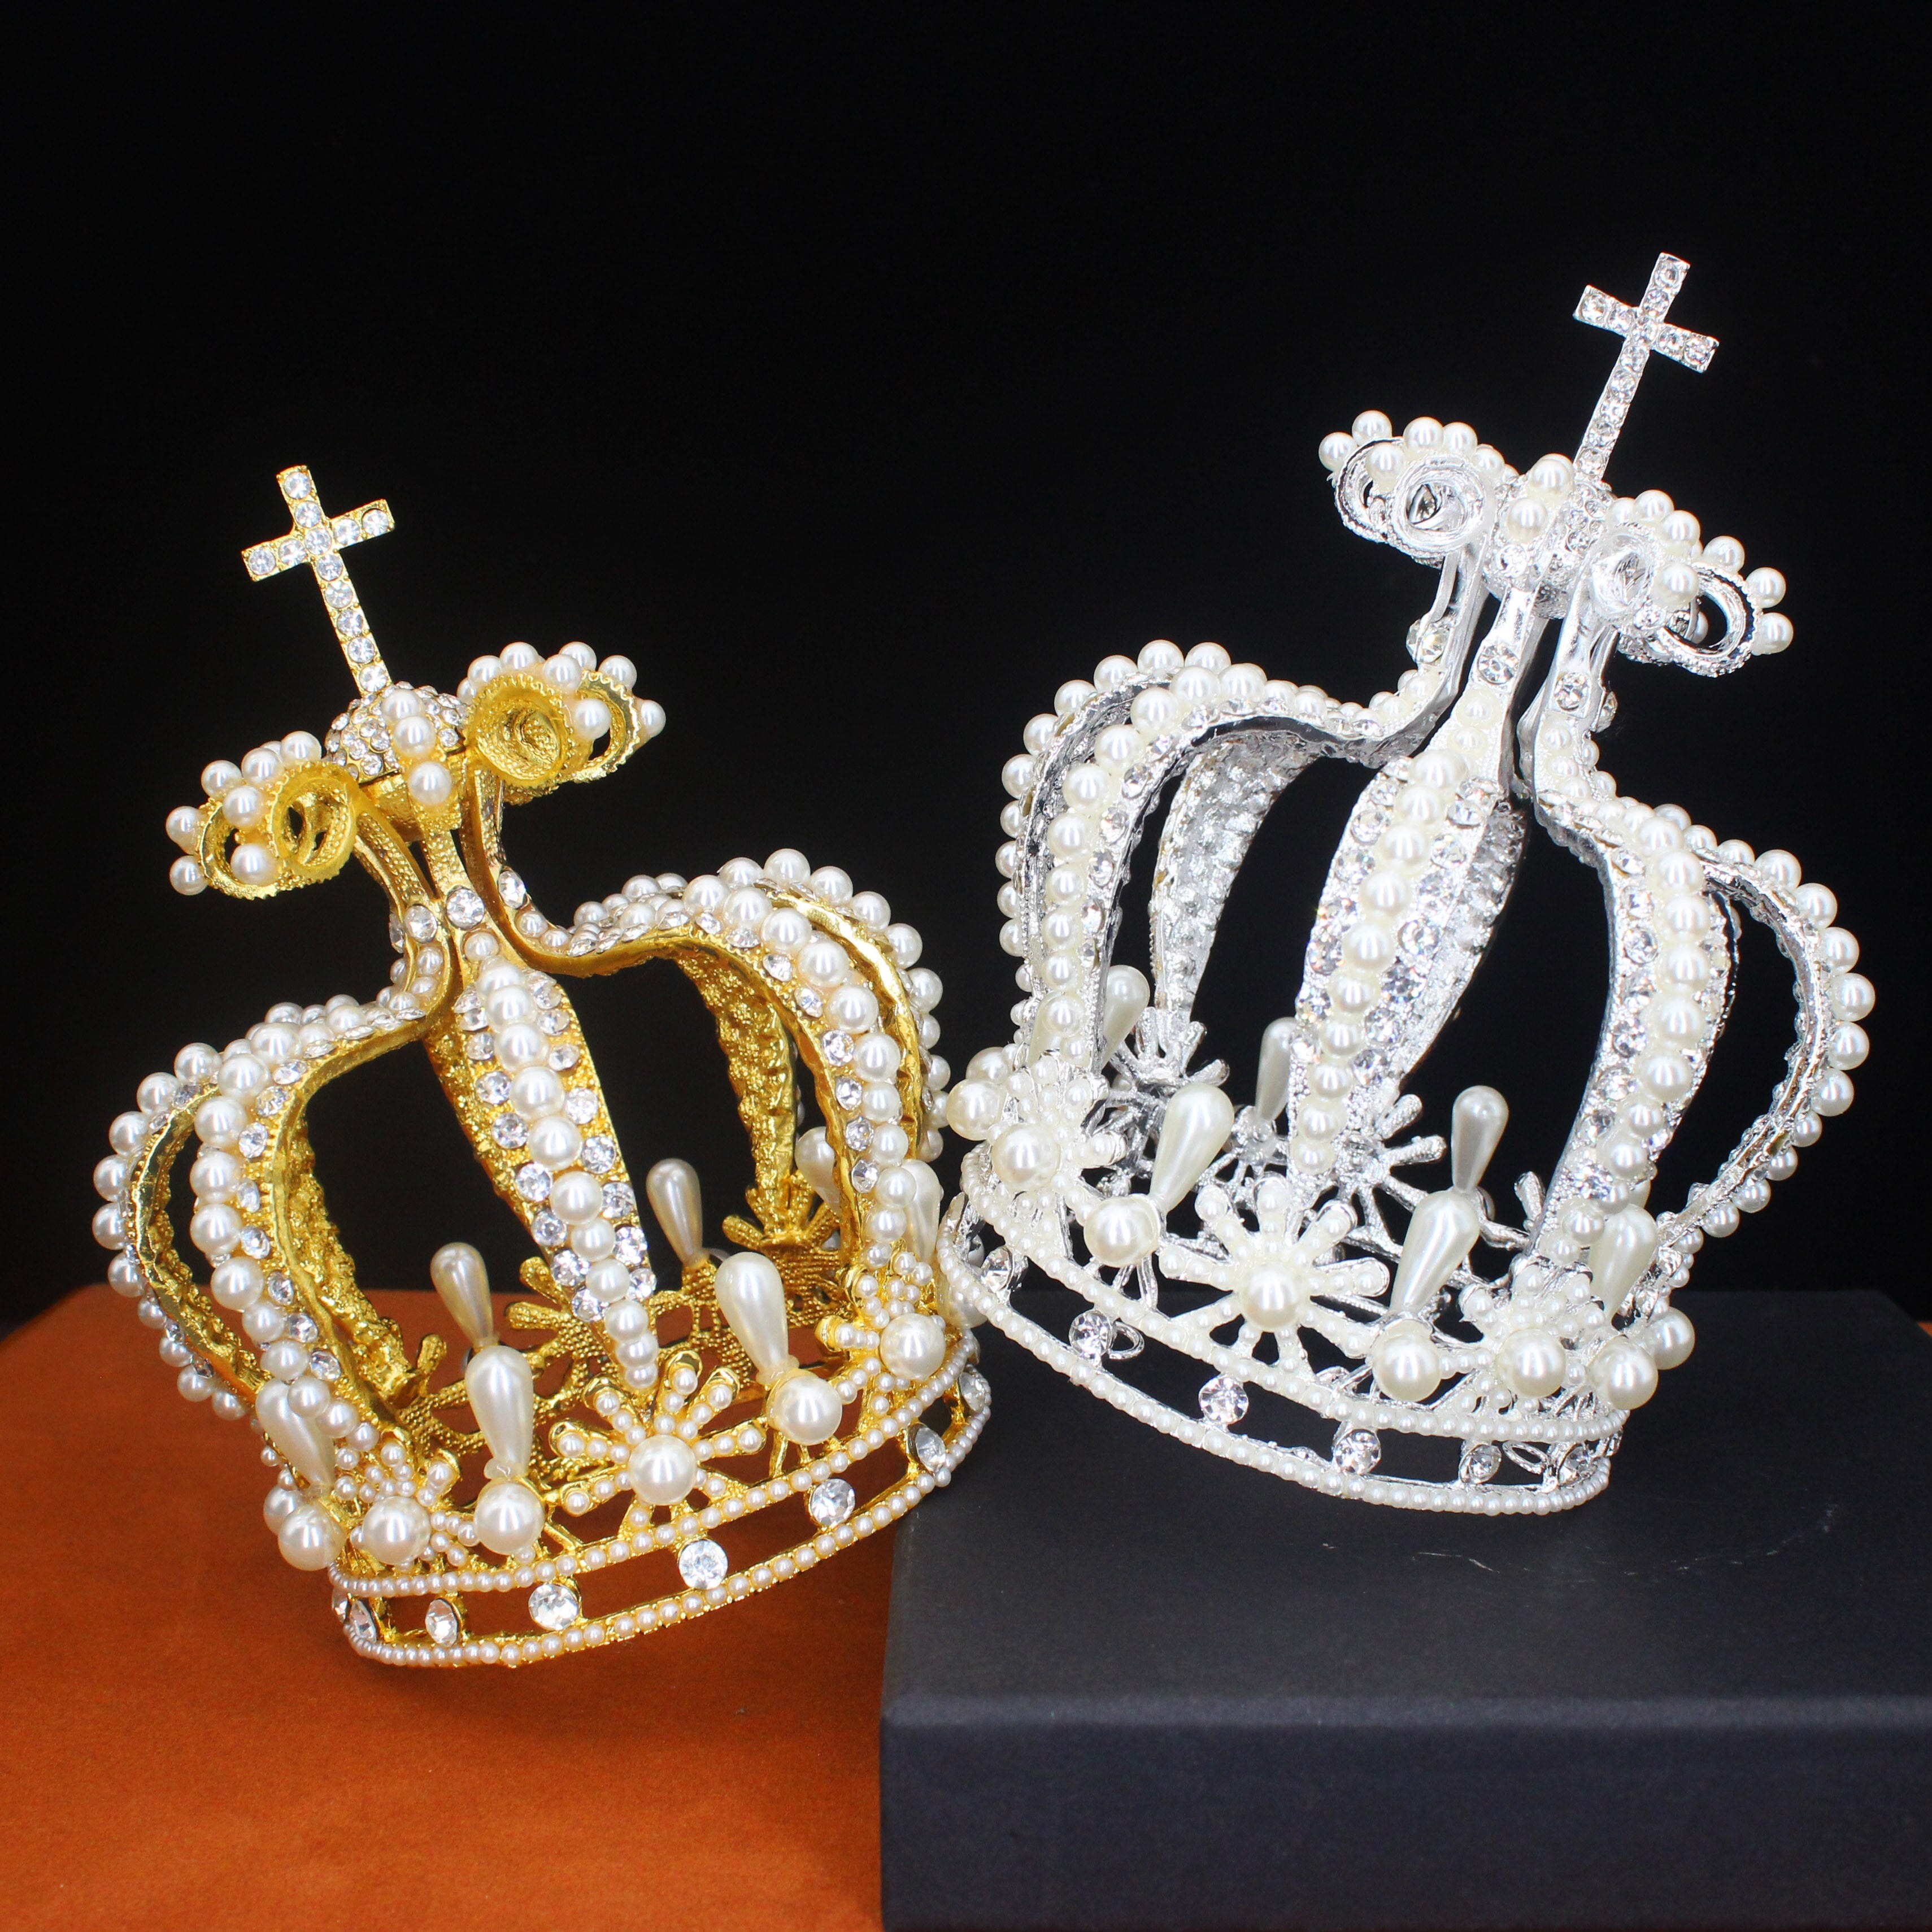 Elegant Crystal Vintage Crowns for Royal Prom, Pageant, and Wedding Glamour!